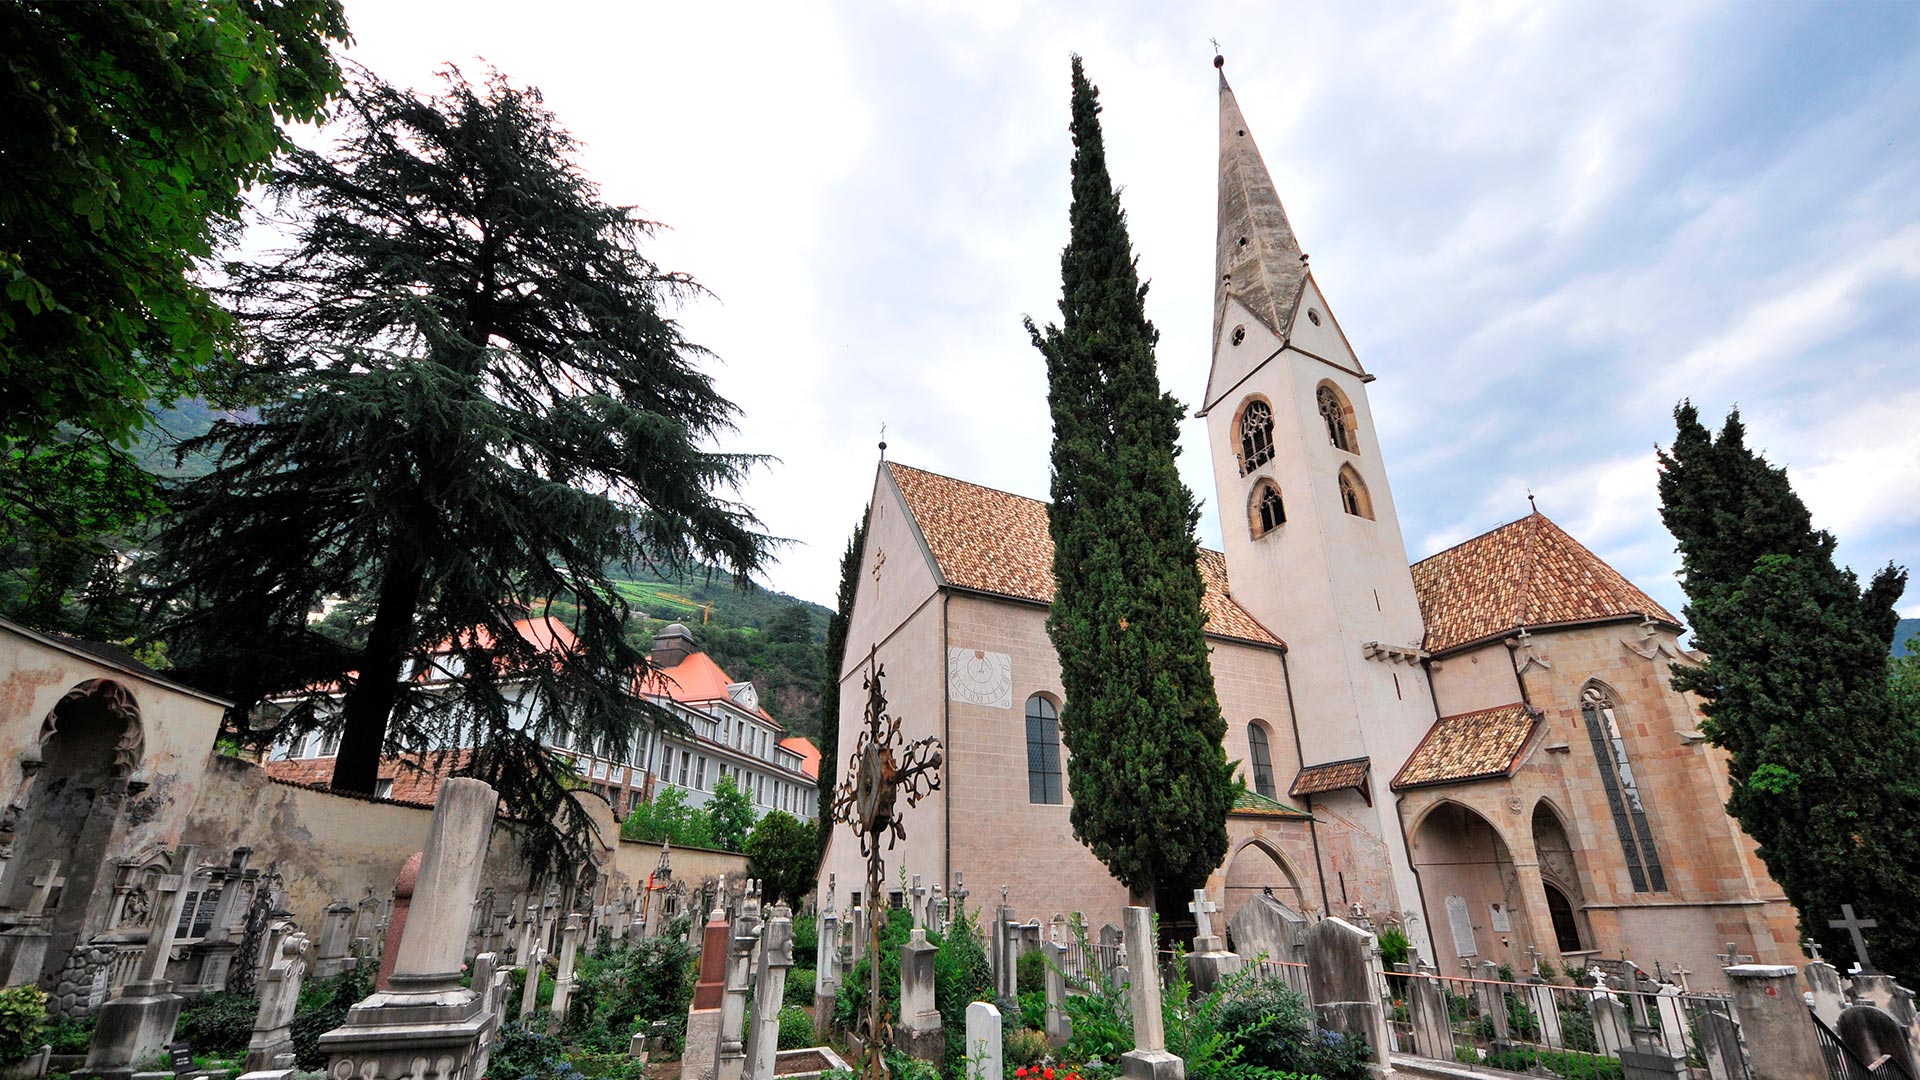 Bolzano's cemetery is a place of high culture and tradition that tells the story of the history and events that took place in the city.